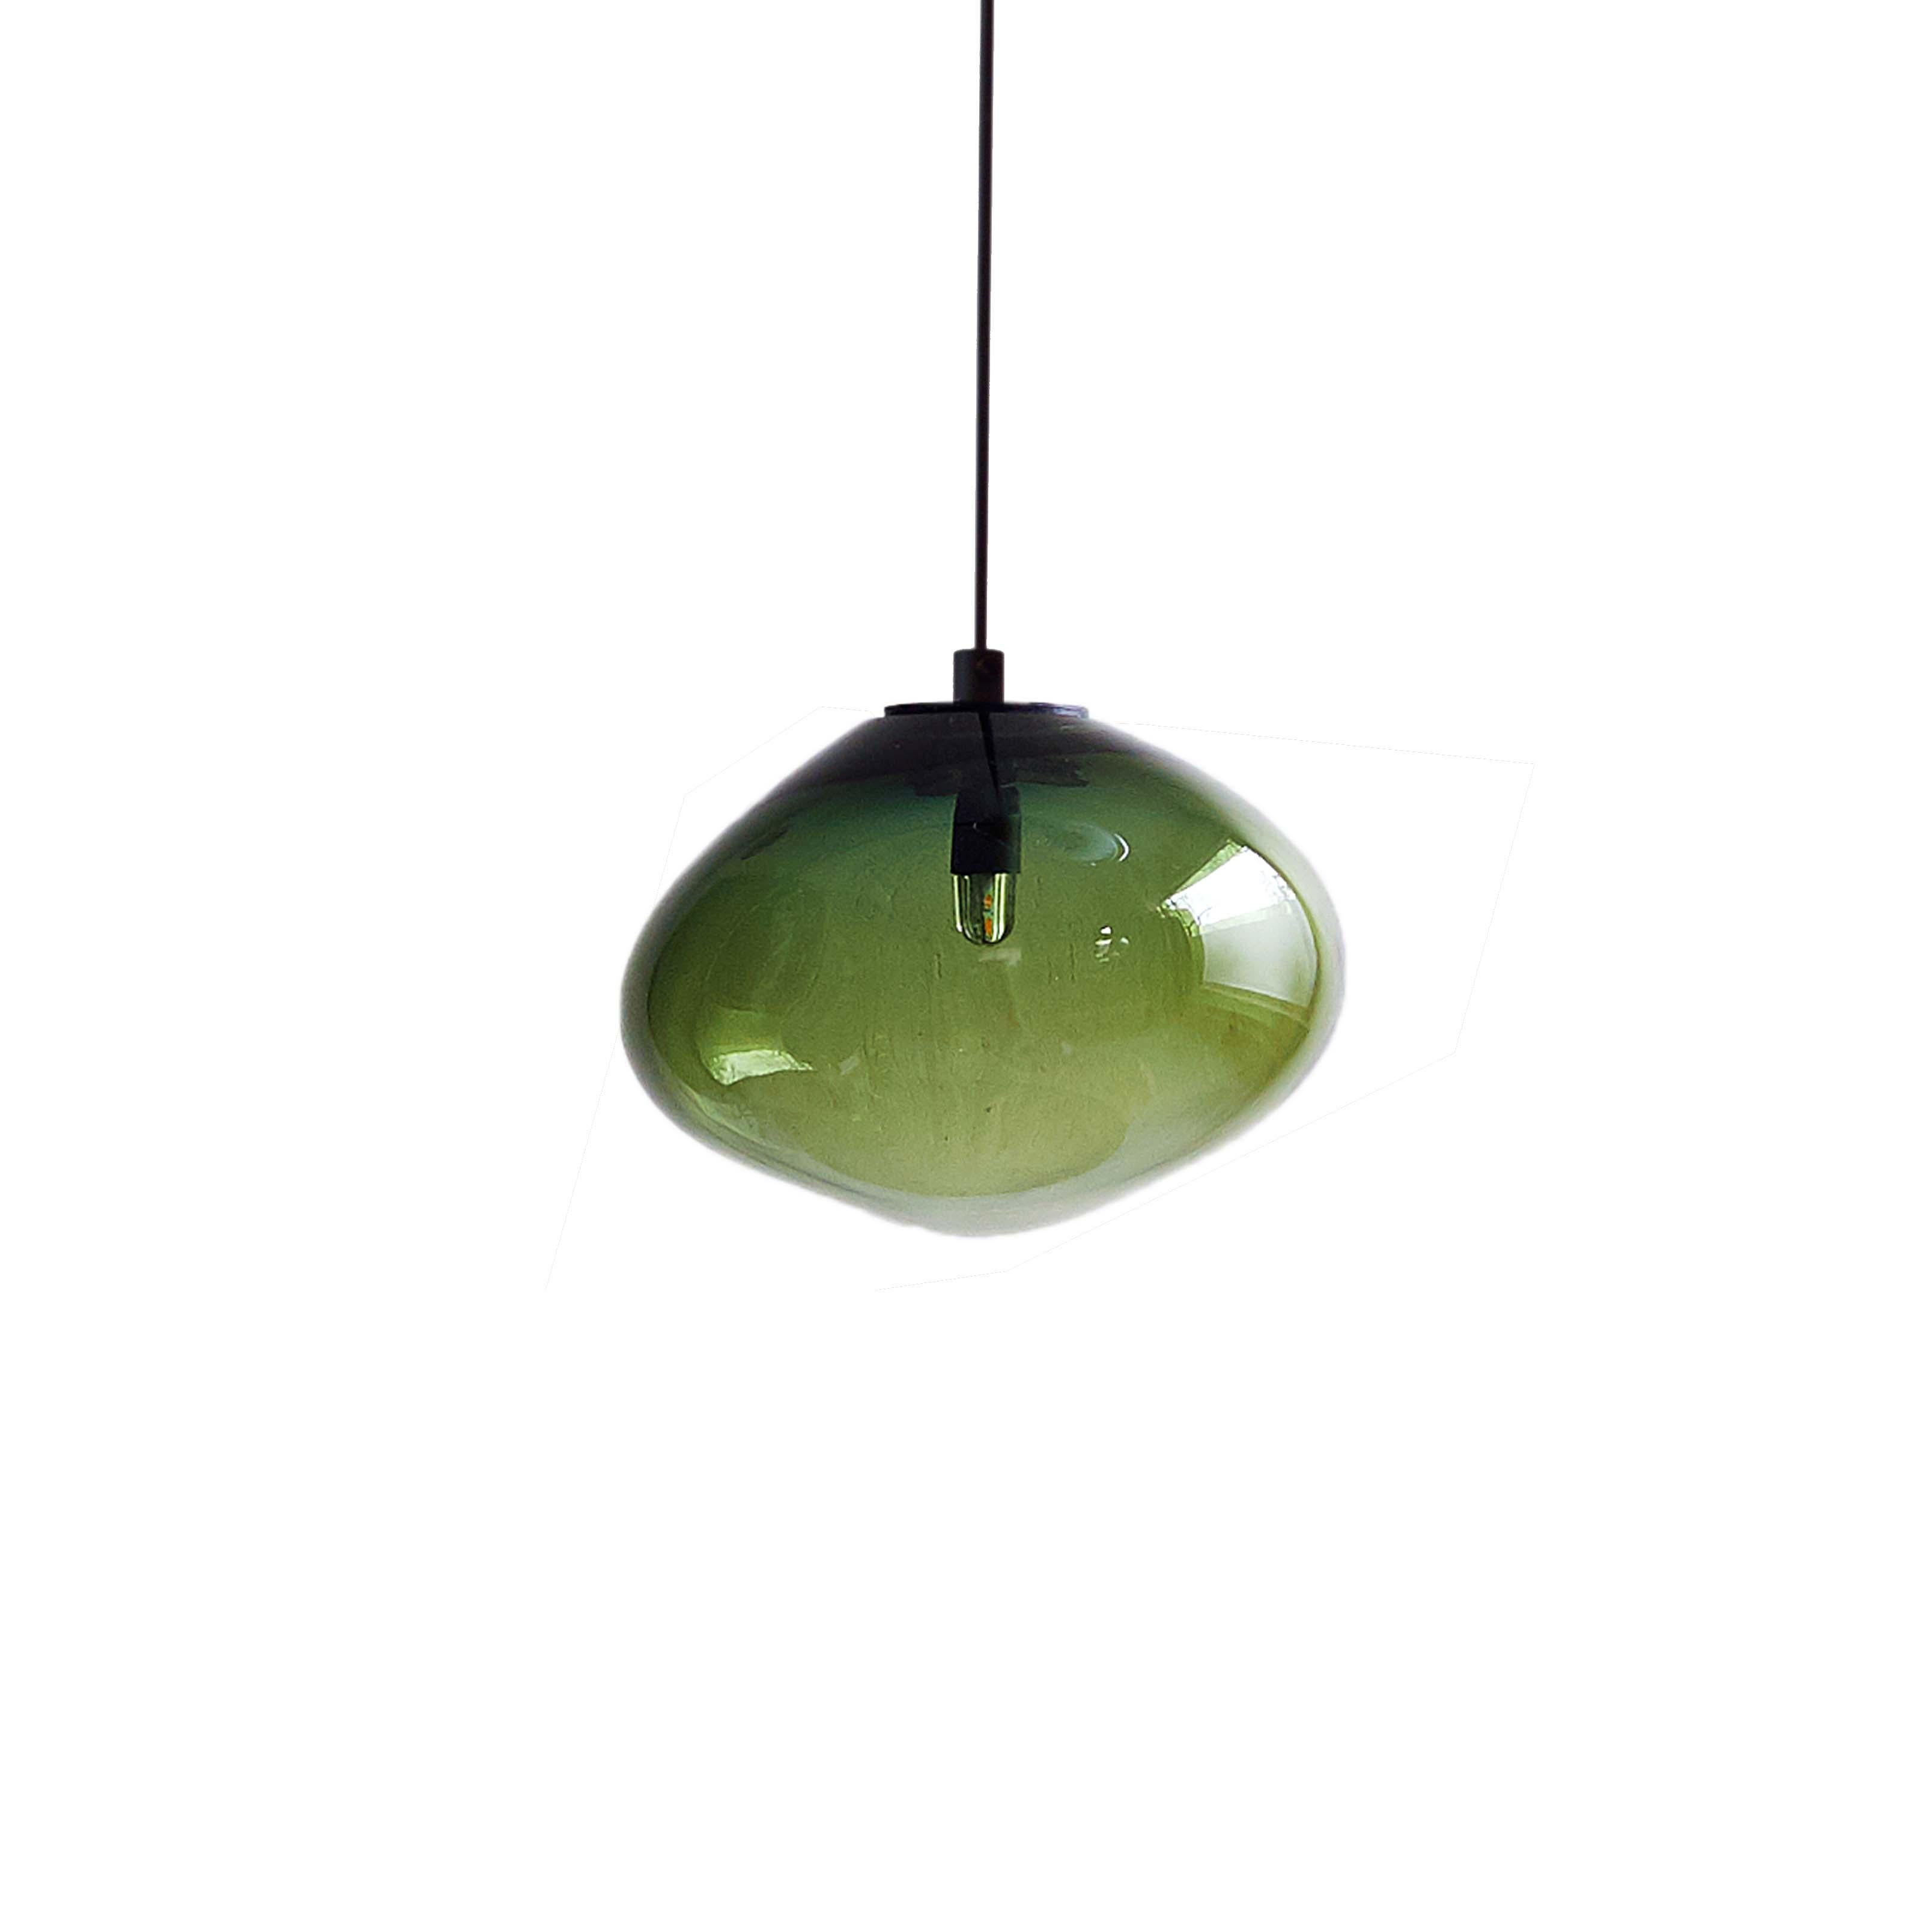 Starglow yellow blue green pendant by ELOA.
No UL listed 
Material: glass, steel, silver.
Dimensions: D 15 x W 13 x H 100 cm.
Also available in different colours and dimensions.

All our lamps can be wired according to each country. If sold to the